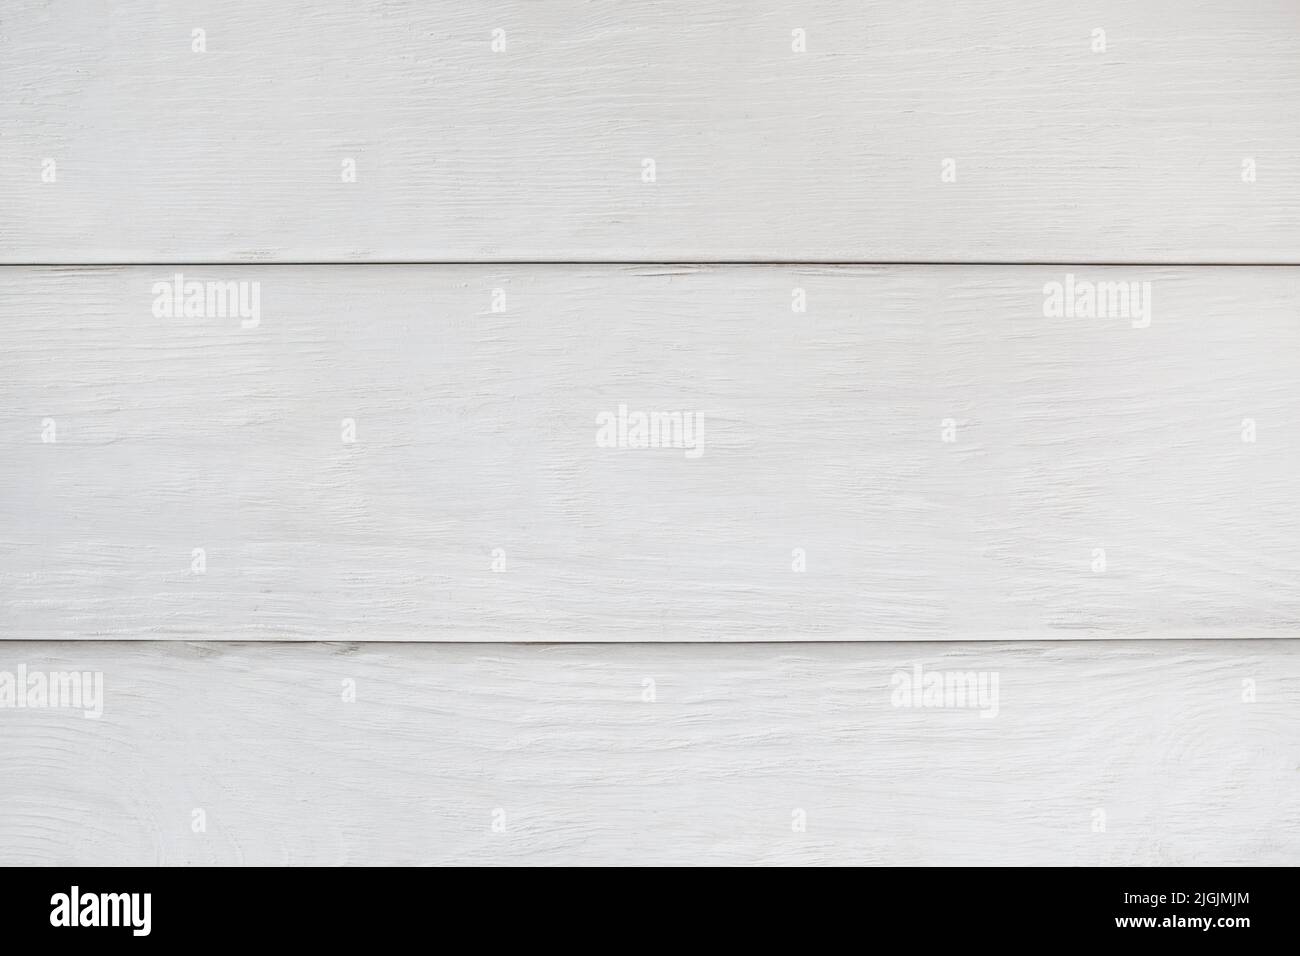 White wooden planks background, free space Stock Photo